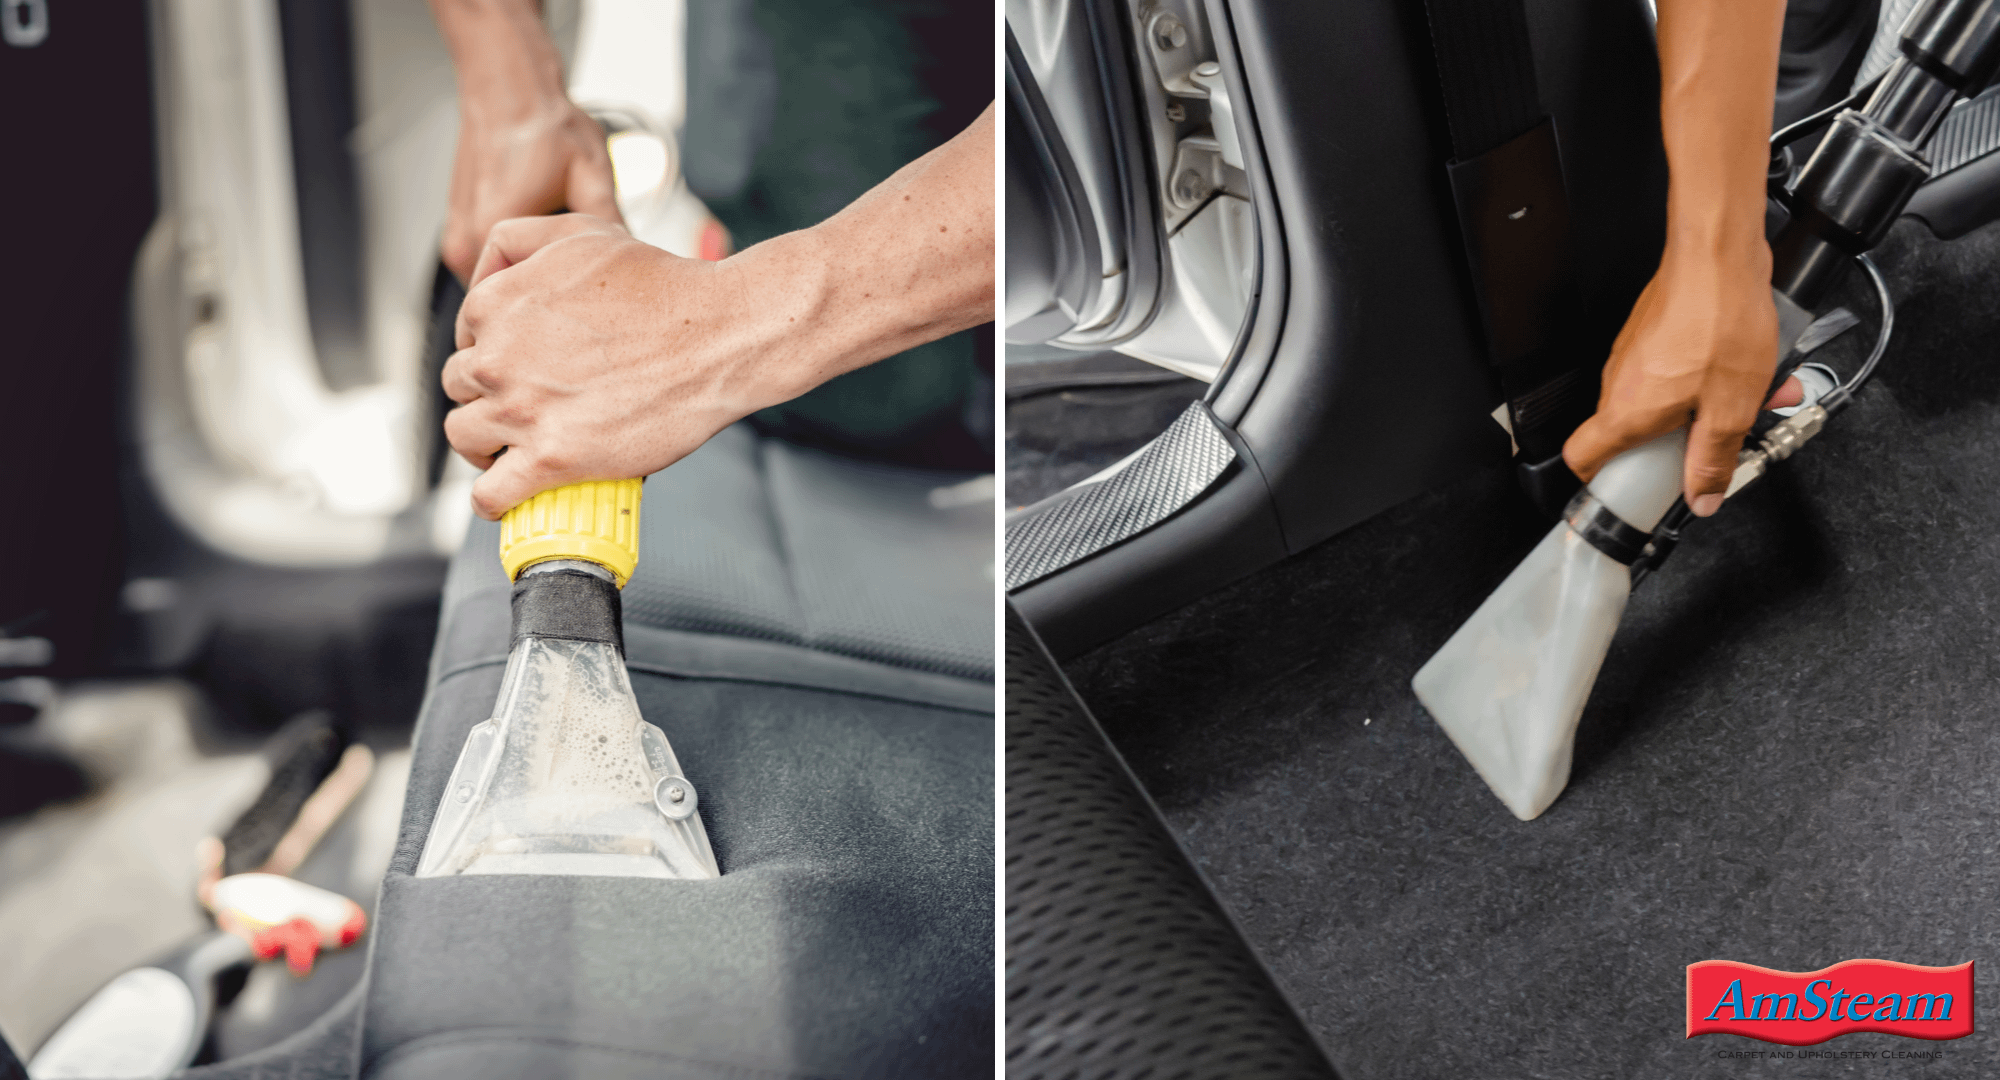 A deep cleaning is done in a car's interior